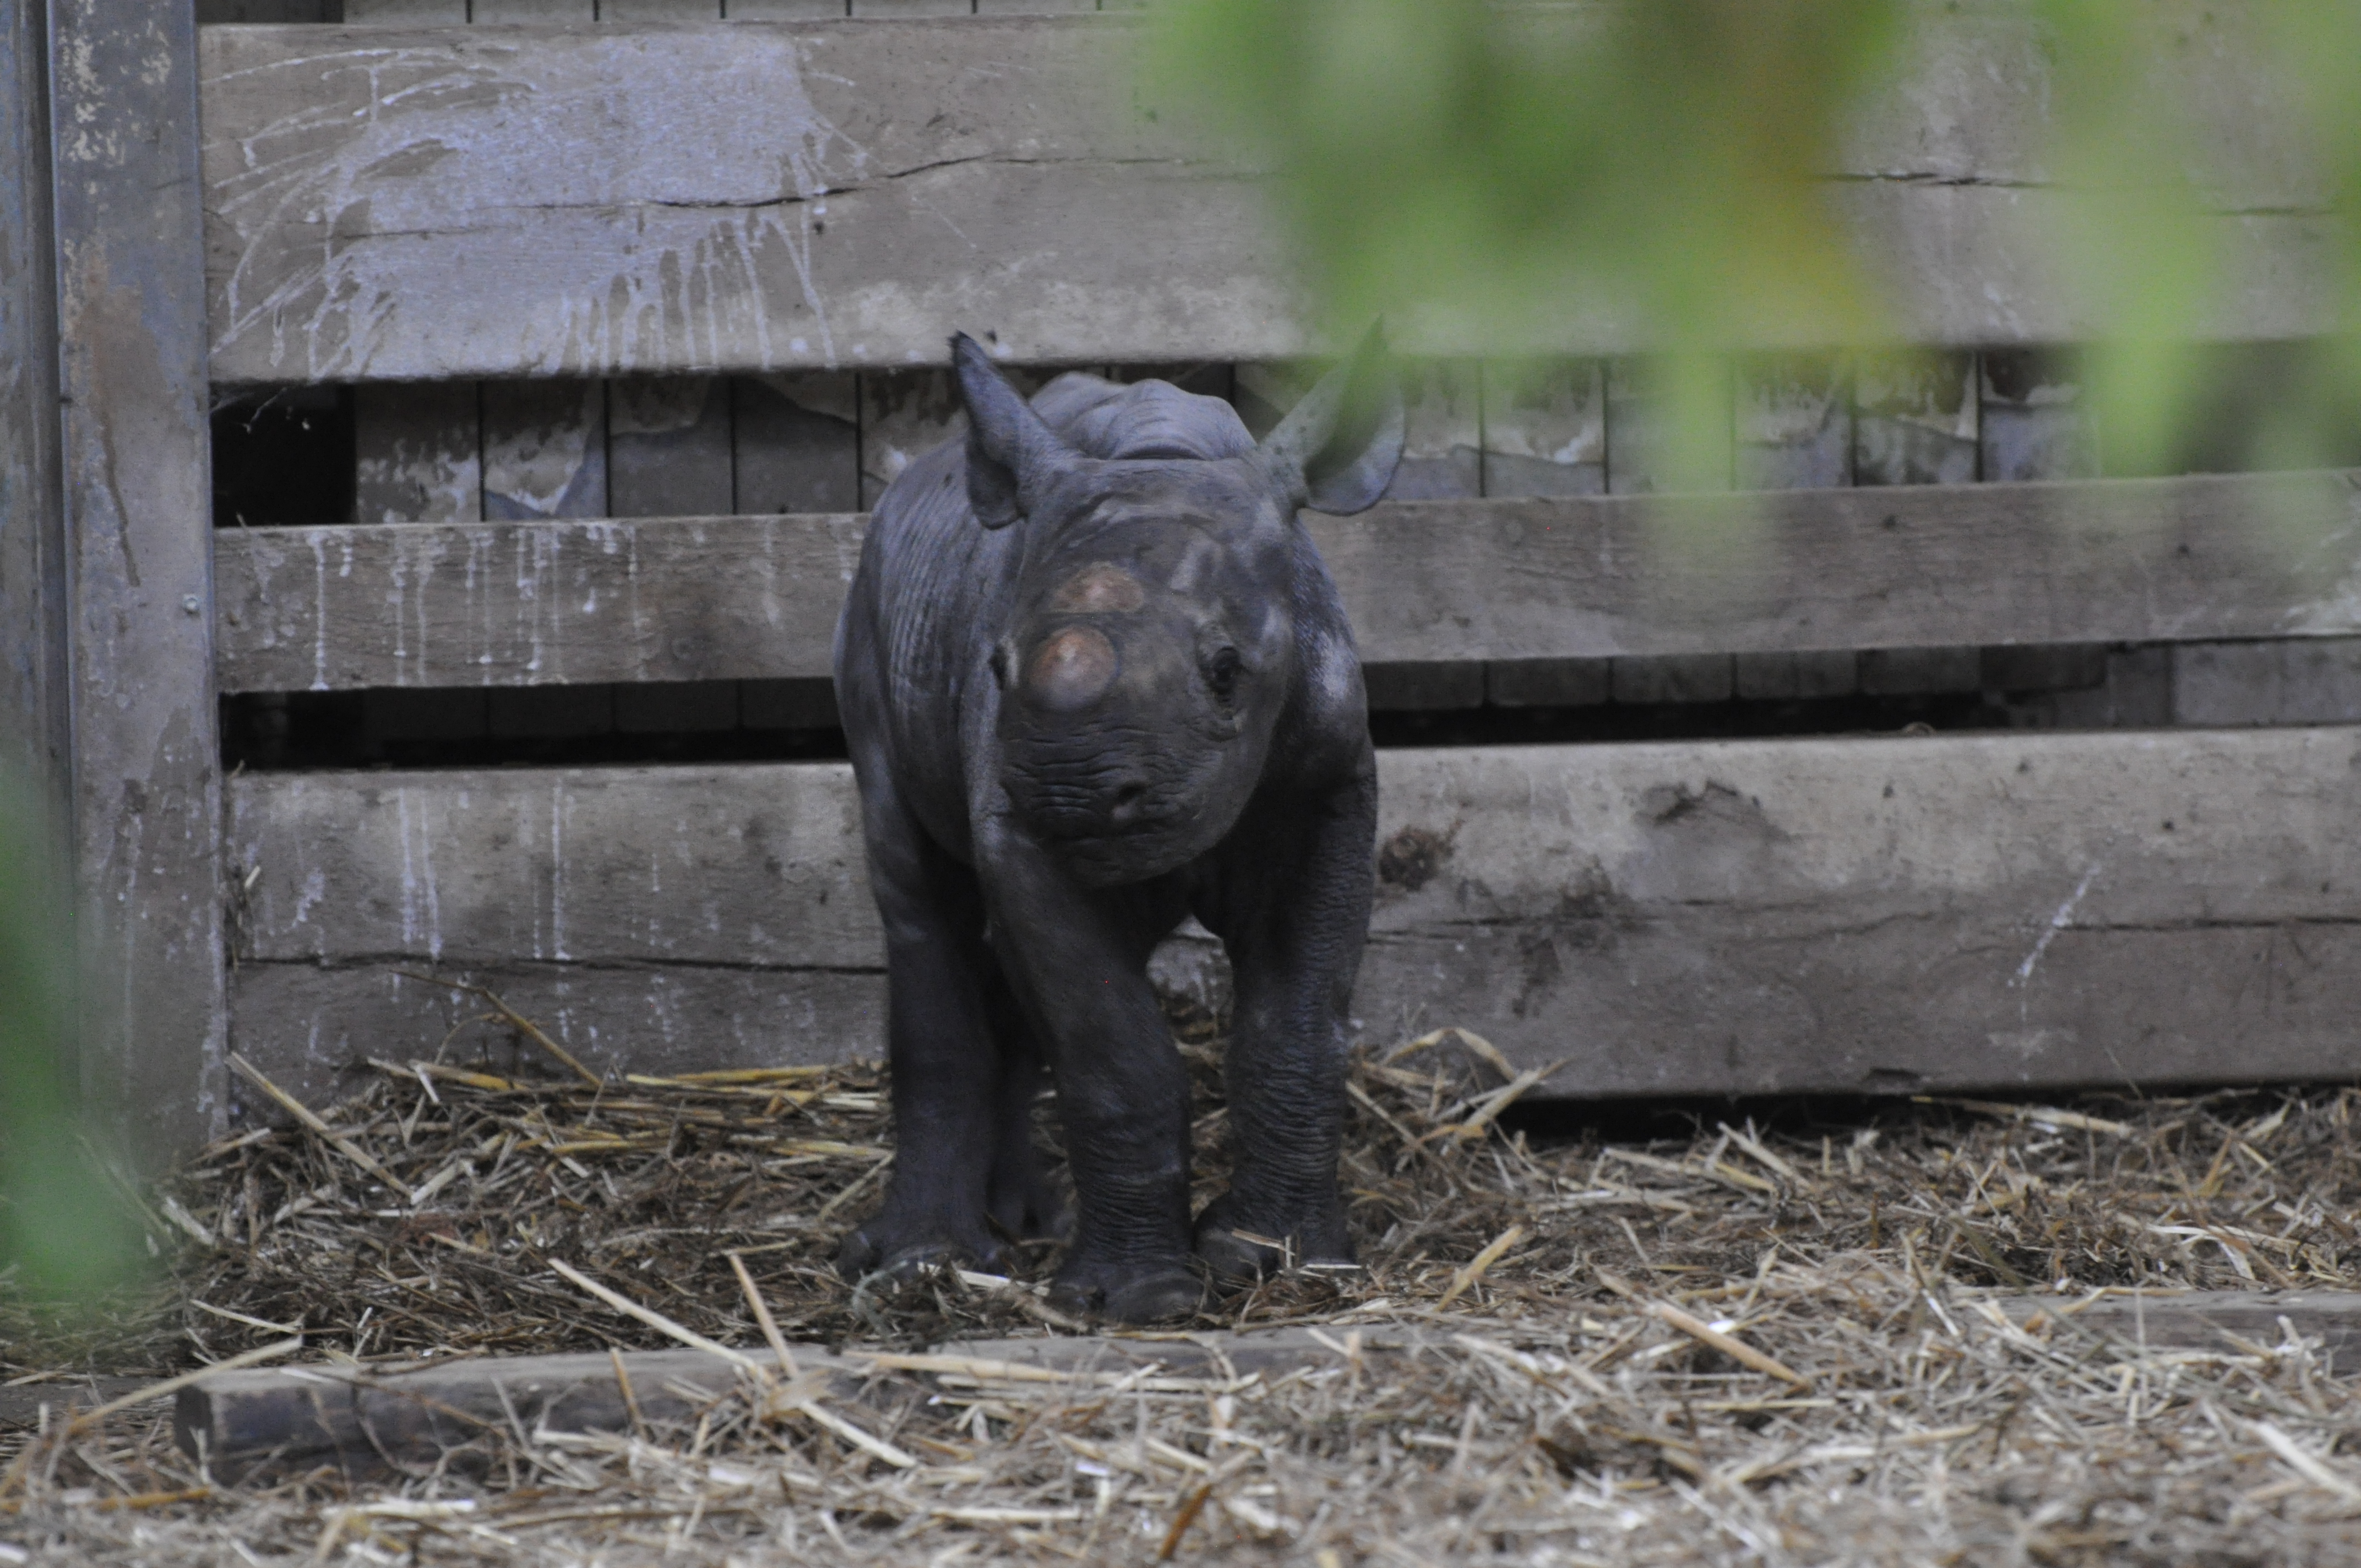 A critically endangered black rhino calf has been born at Flamingo Land zoo, in North Yorkshire.